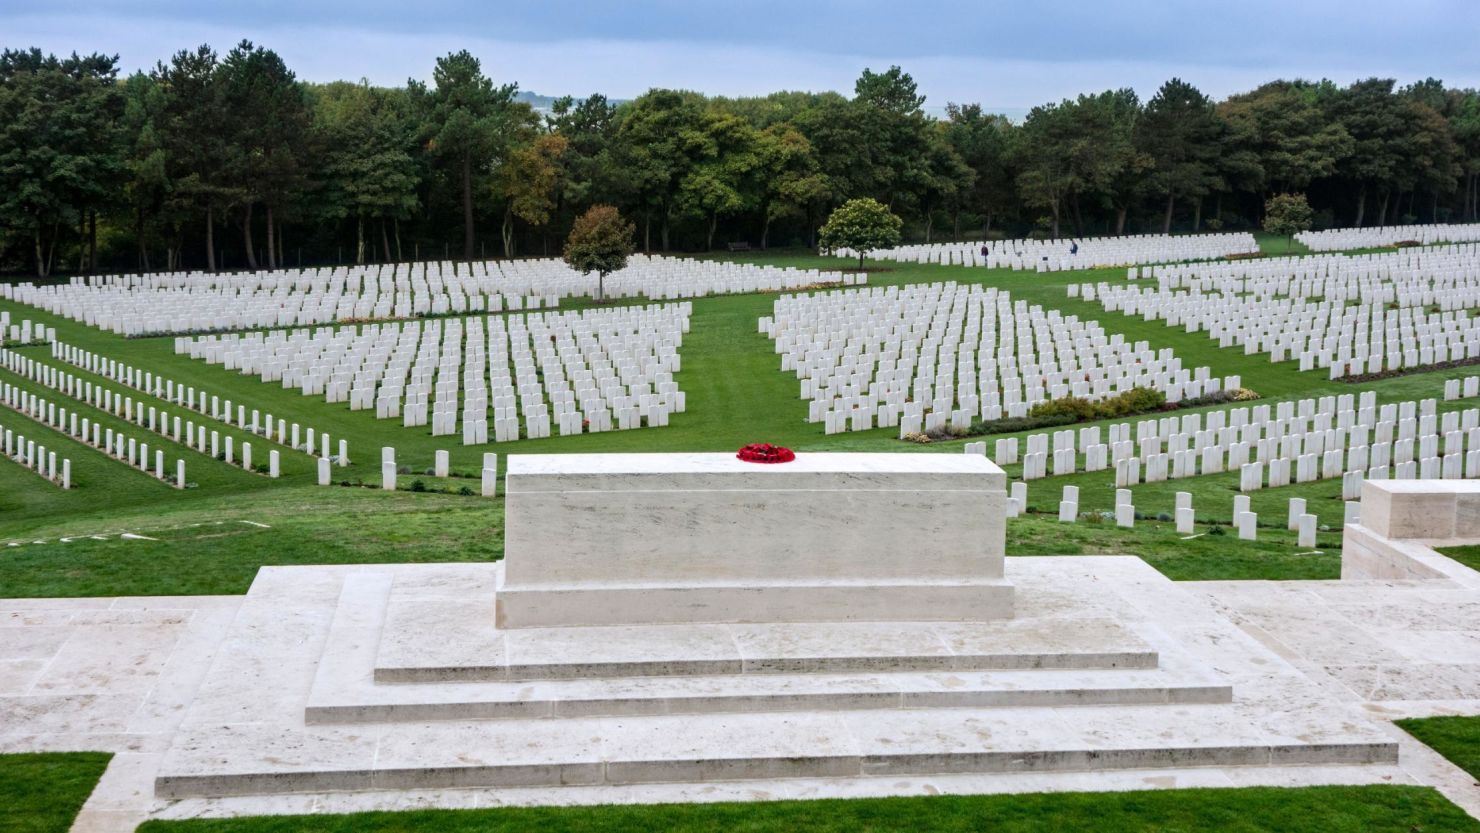 Headstones at the Etaples Military Cemetery, the largest Commonwealth War Graves Commission cemetery in France.